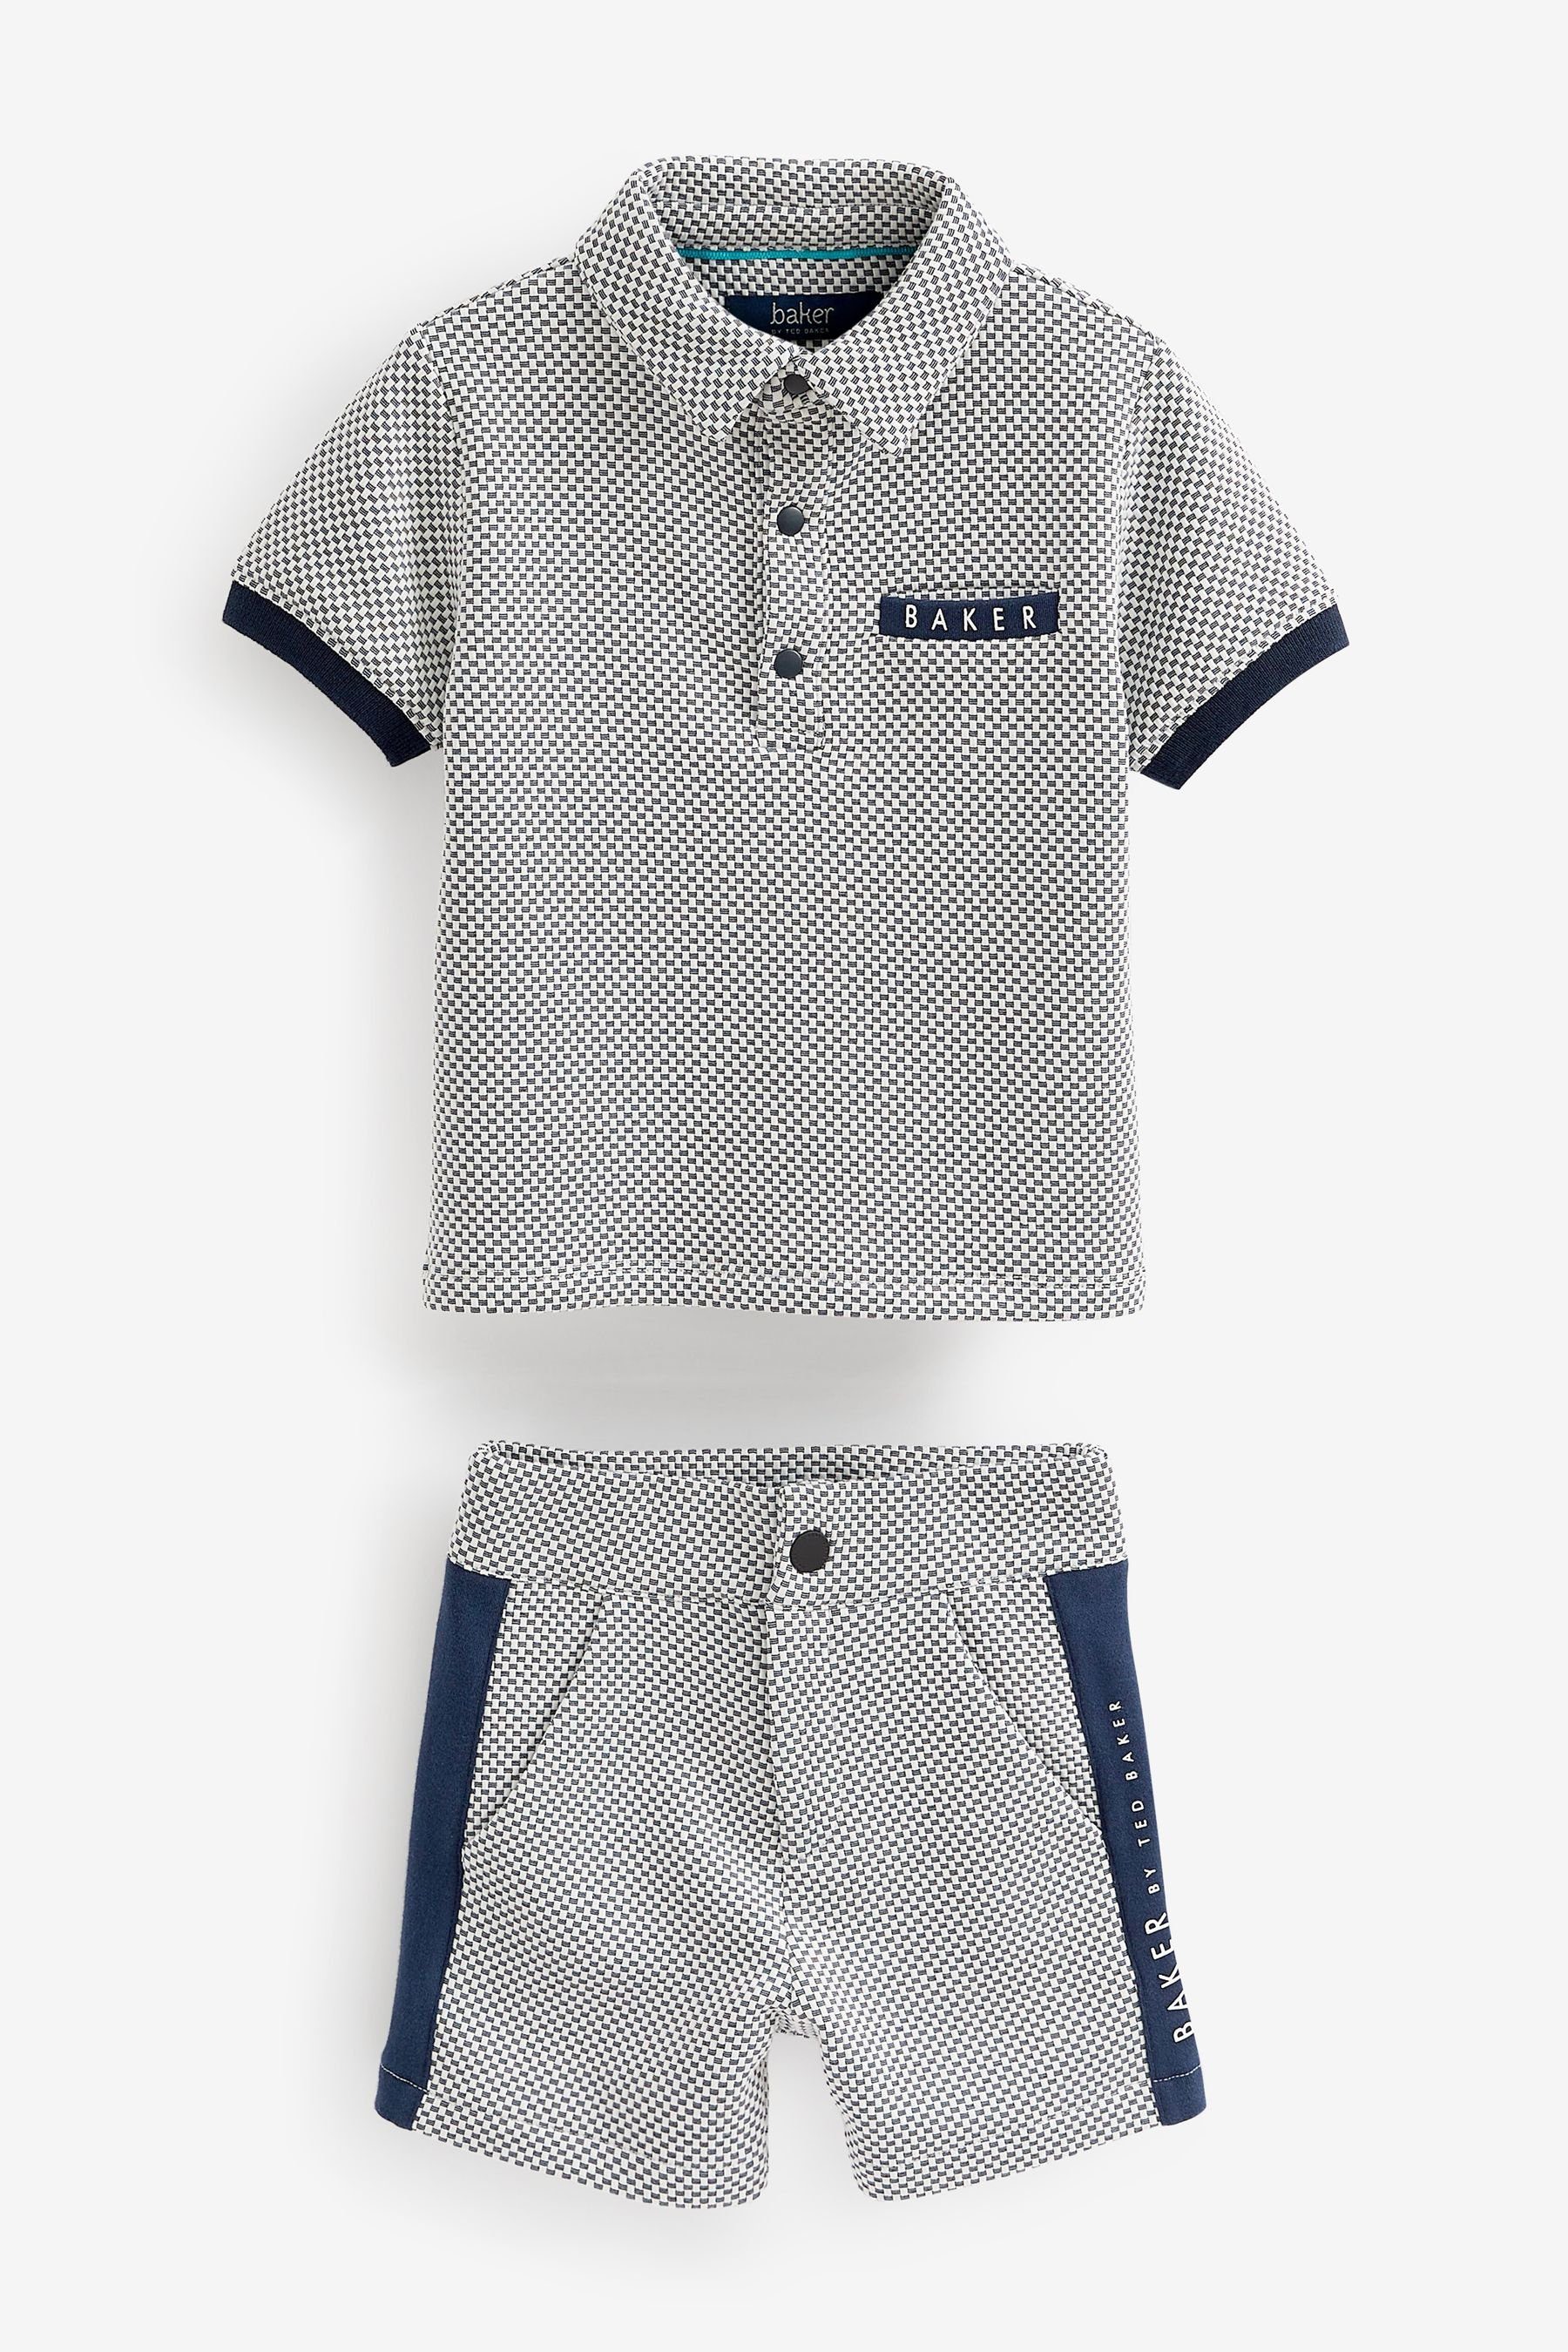 Baker by Ted Baker Shirt mit Poloshirt Baker Shorts Ted Shorts Set by & Navy und (2-tlg) Baker